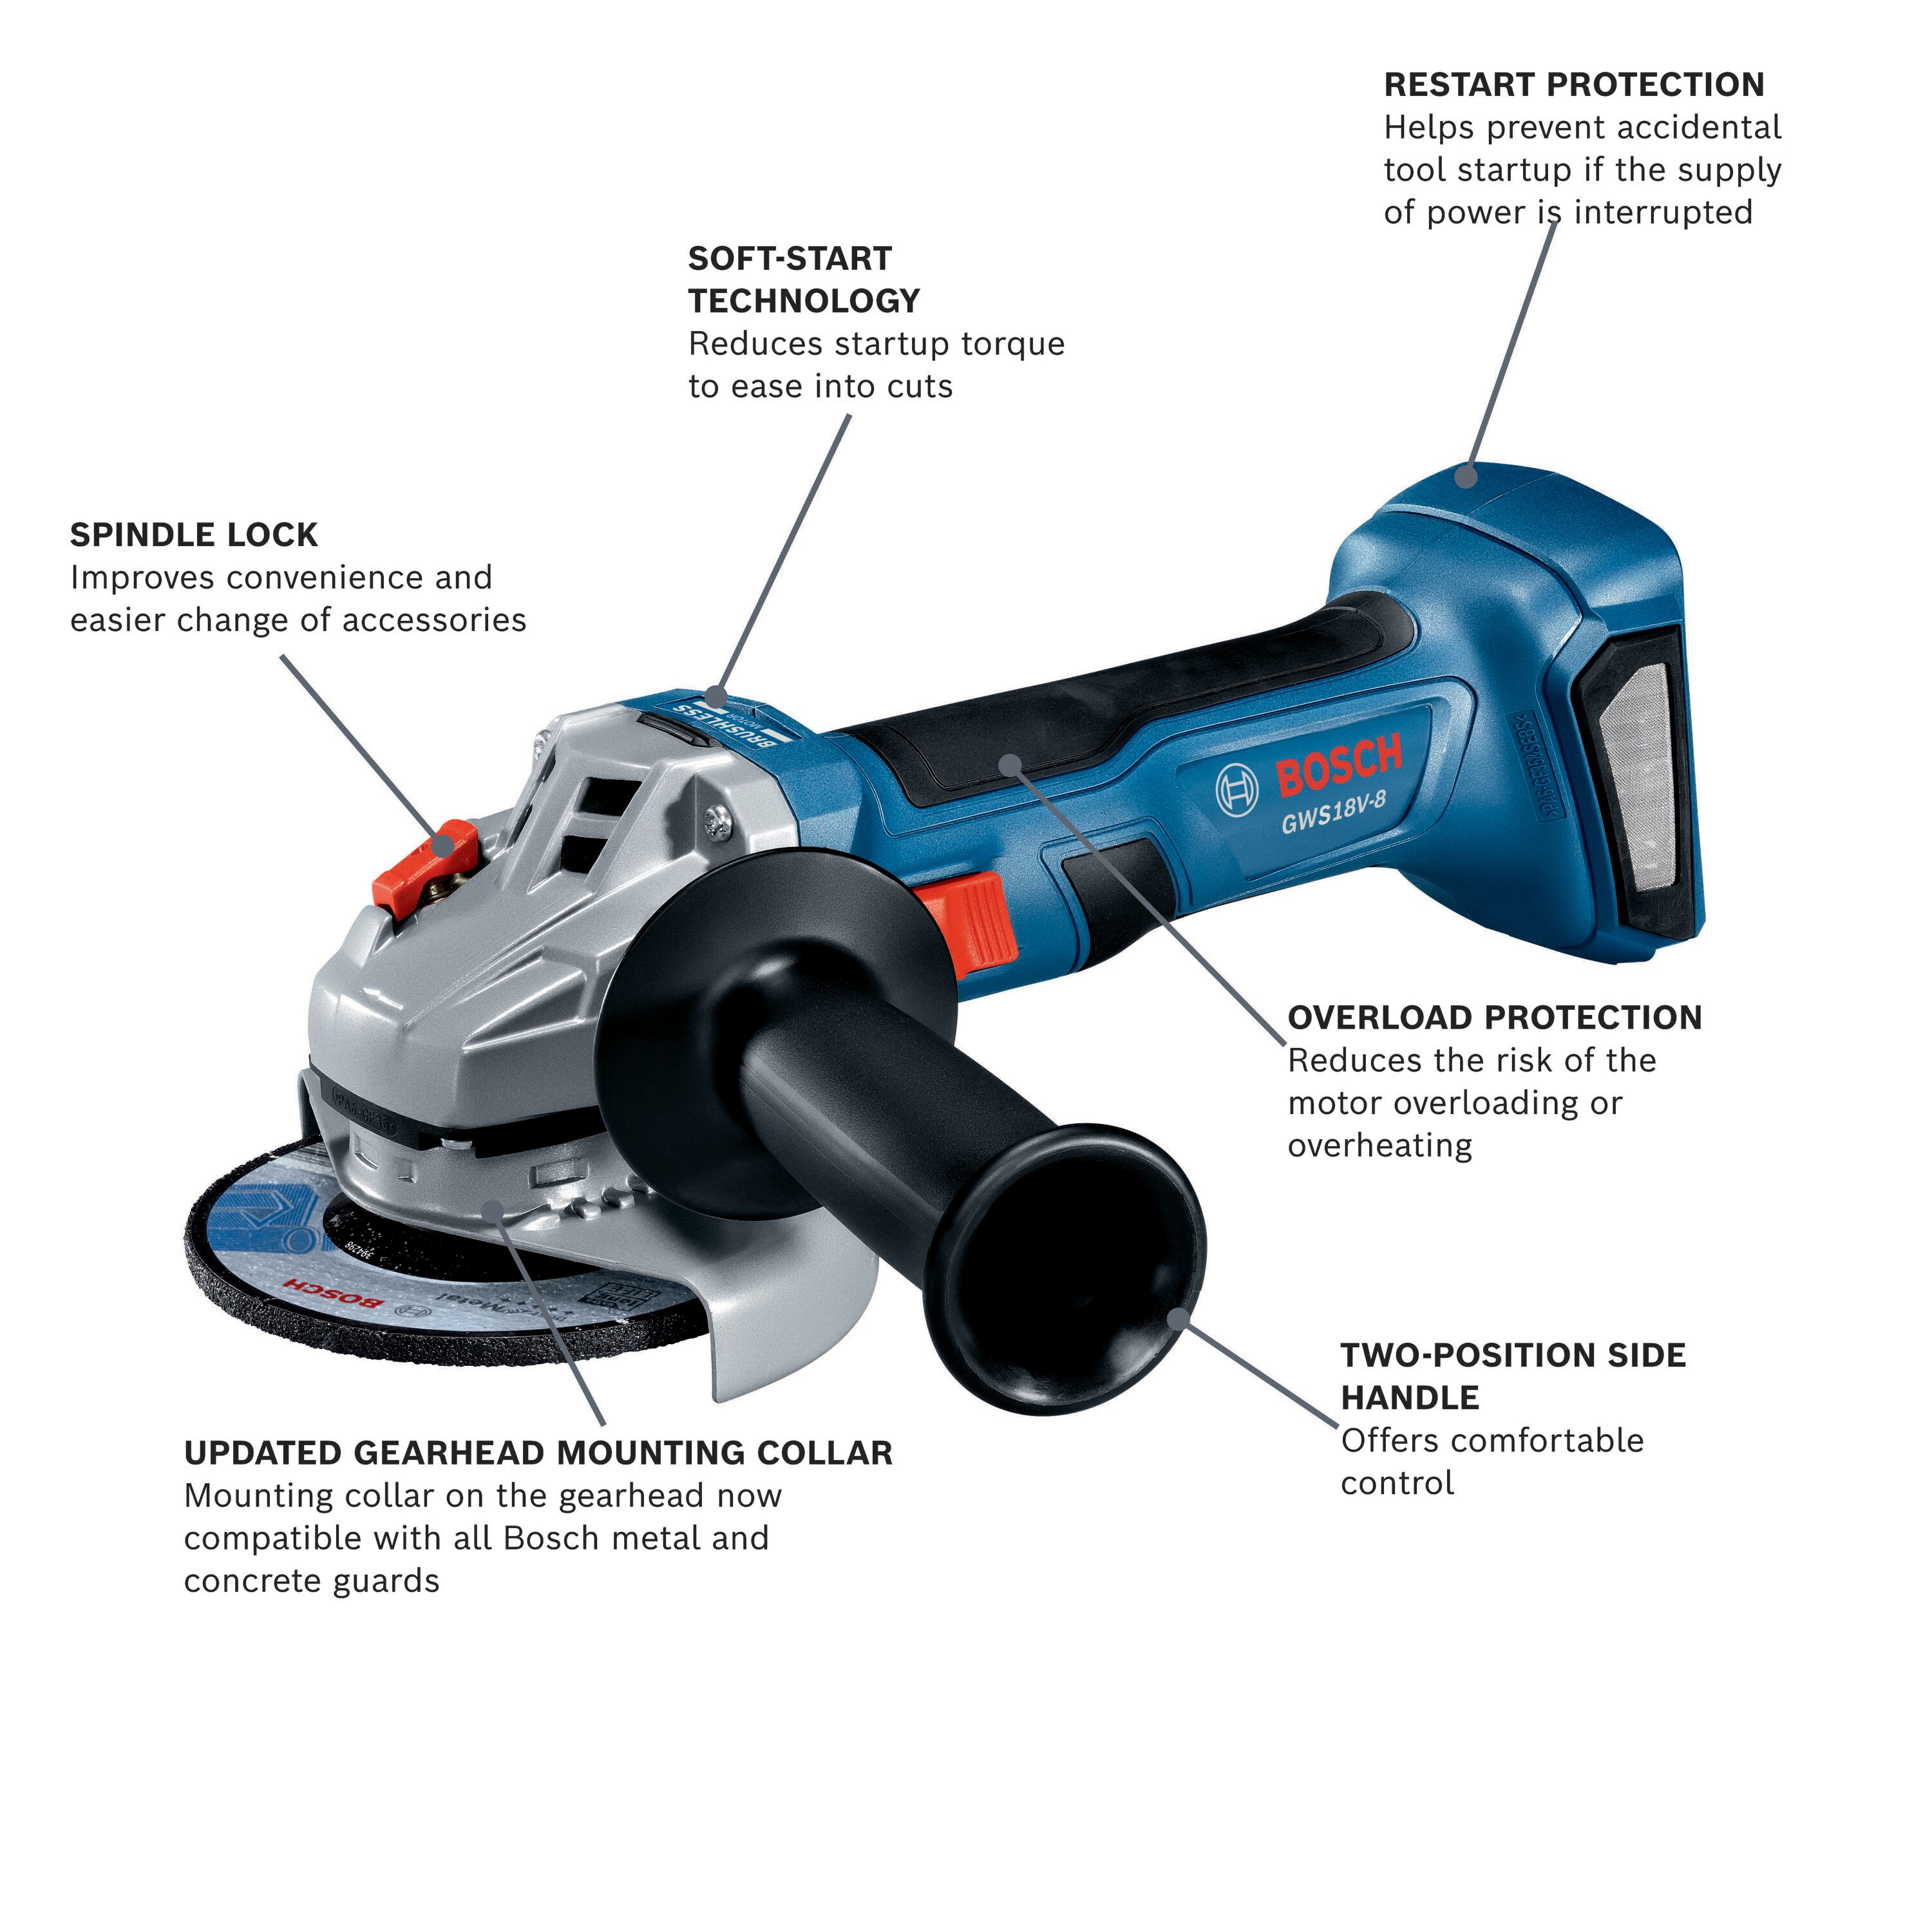 Shop Bosch CORE18V™ Cordless Bare Tool Collection at